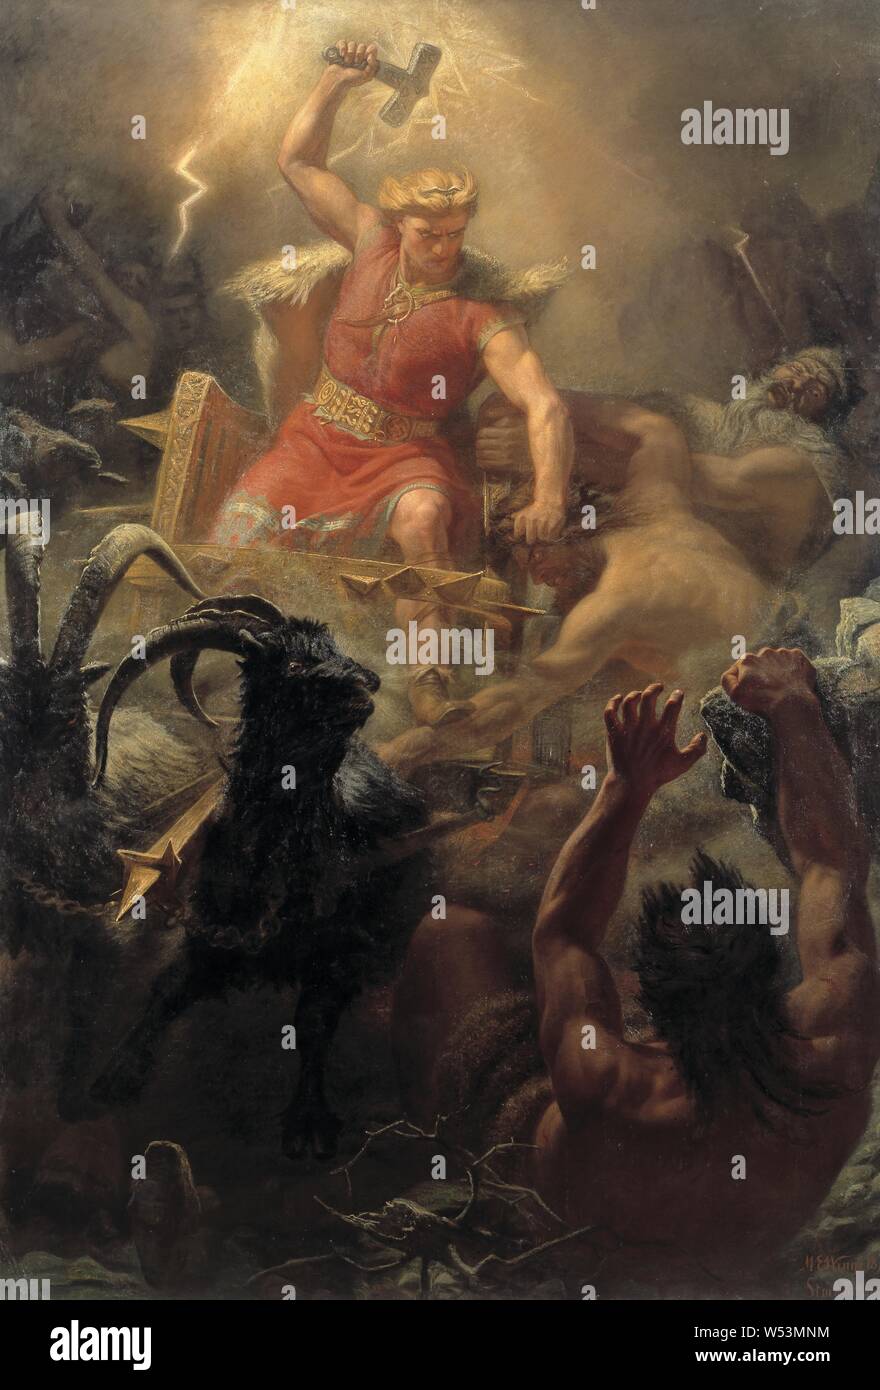 Mårten Eskil Winge, Tor's Fight with the Giants, Thor's battle with the giants, painting, 1872, Oil on canvas, Height, 484 cm (15.8 ft), Width, 333 cm (10.9, ft), Signed, ME, Winge 1872. Stockholm. Stock Photo